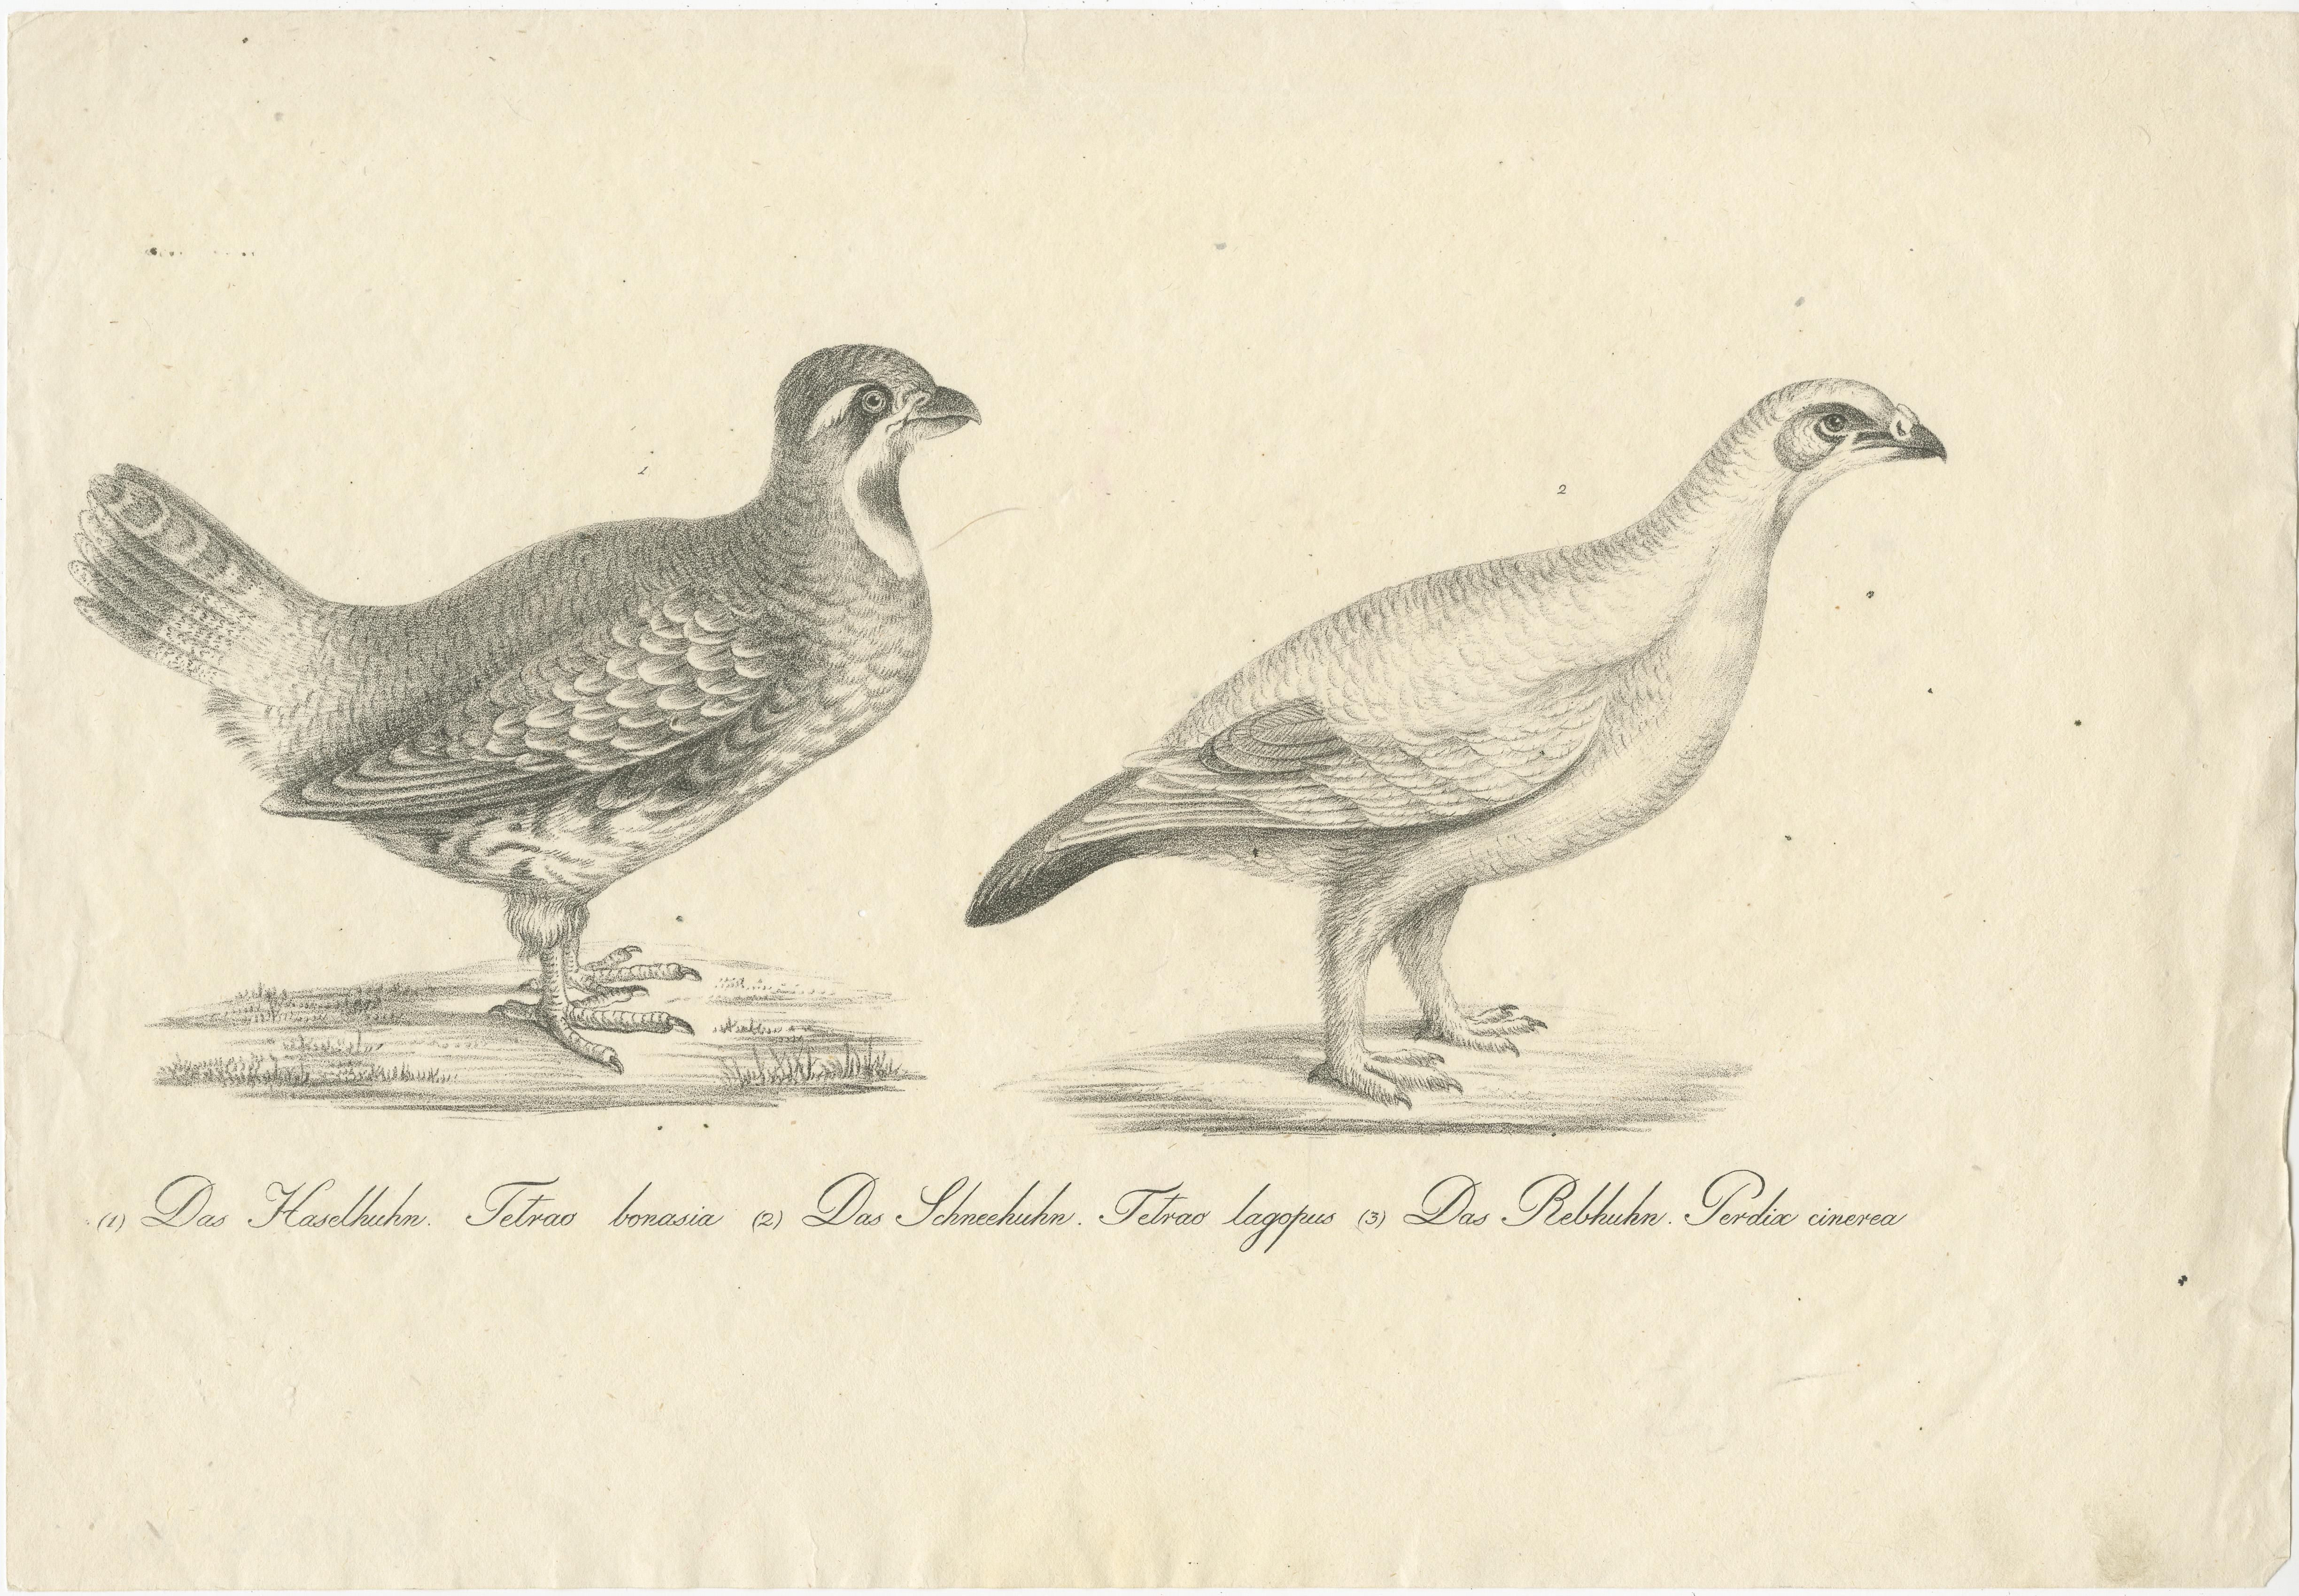 Antique print titled 'Das Haselhuhn (.) Das Schneehuhn (.)'. Original old print of a hazel grouse and lagopus grouse. Source unknown, to be determined. Published circa 1860.